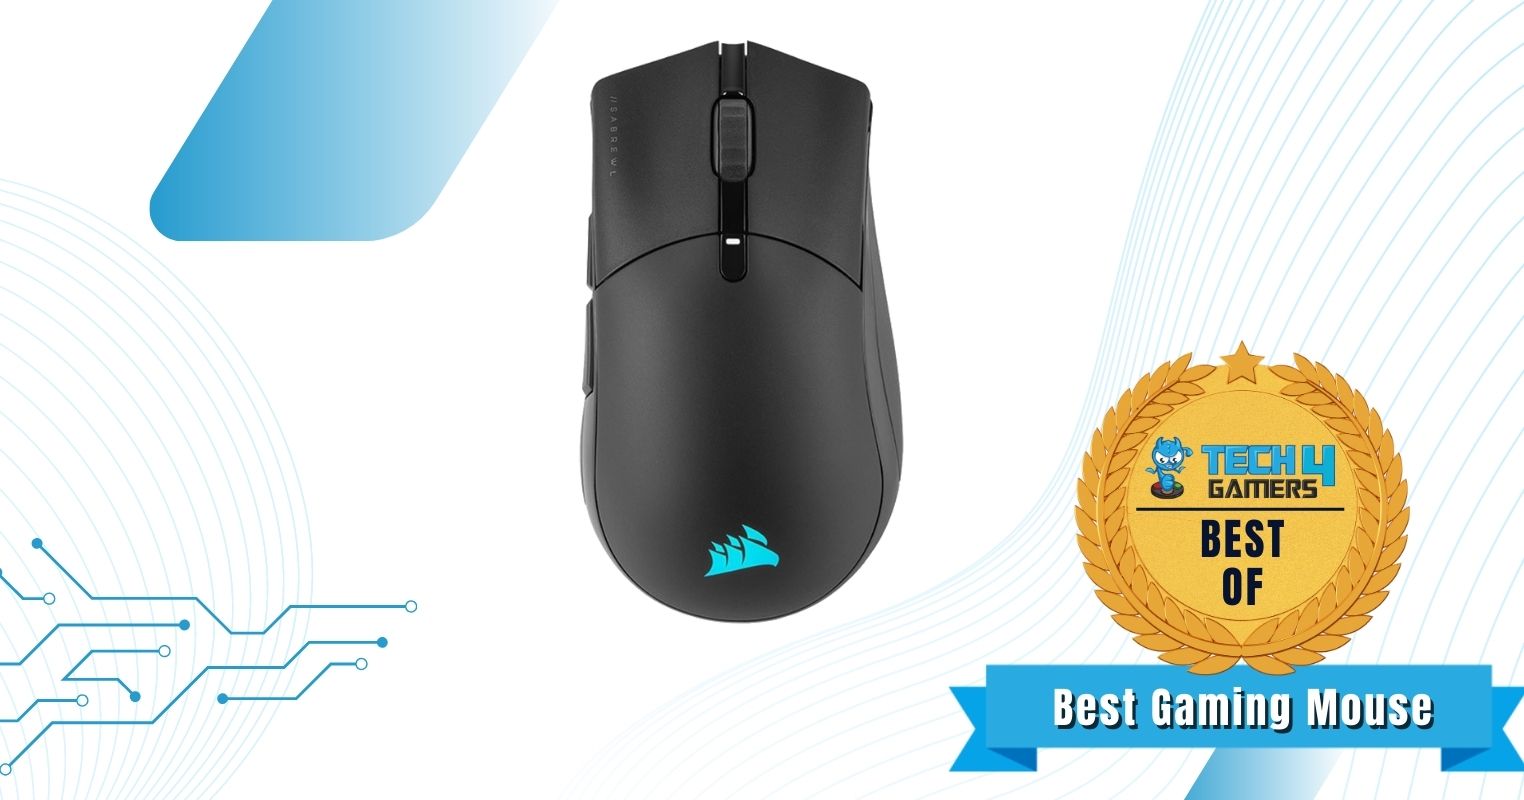 Best Gaming Mouse For Graphic Designers - Corsair Sabre RGB Pro Wireless